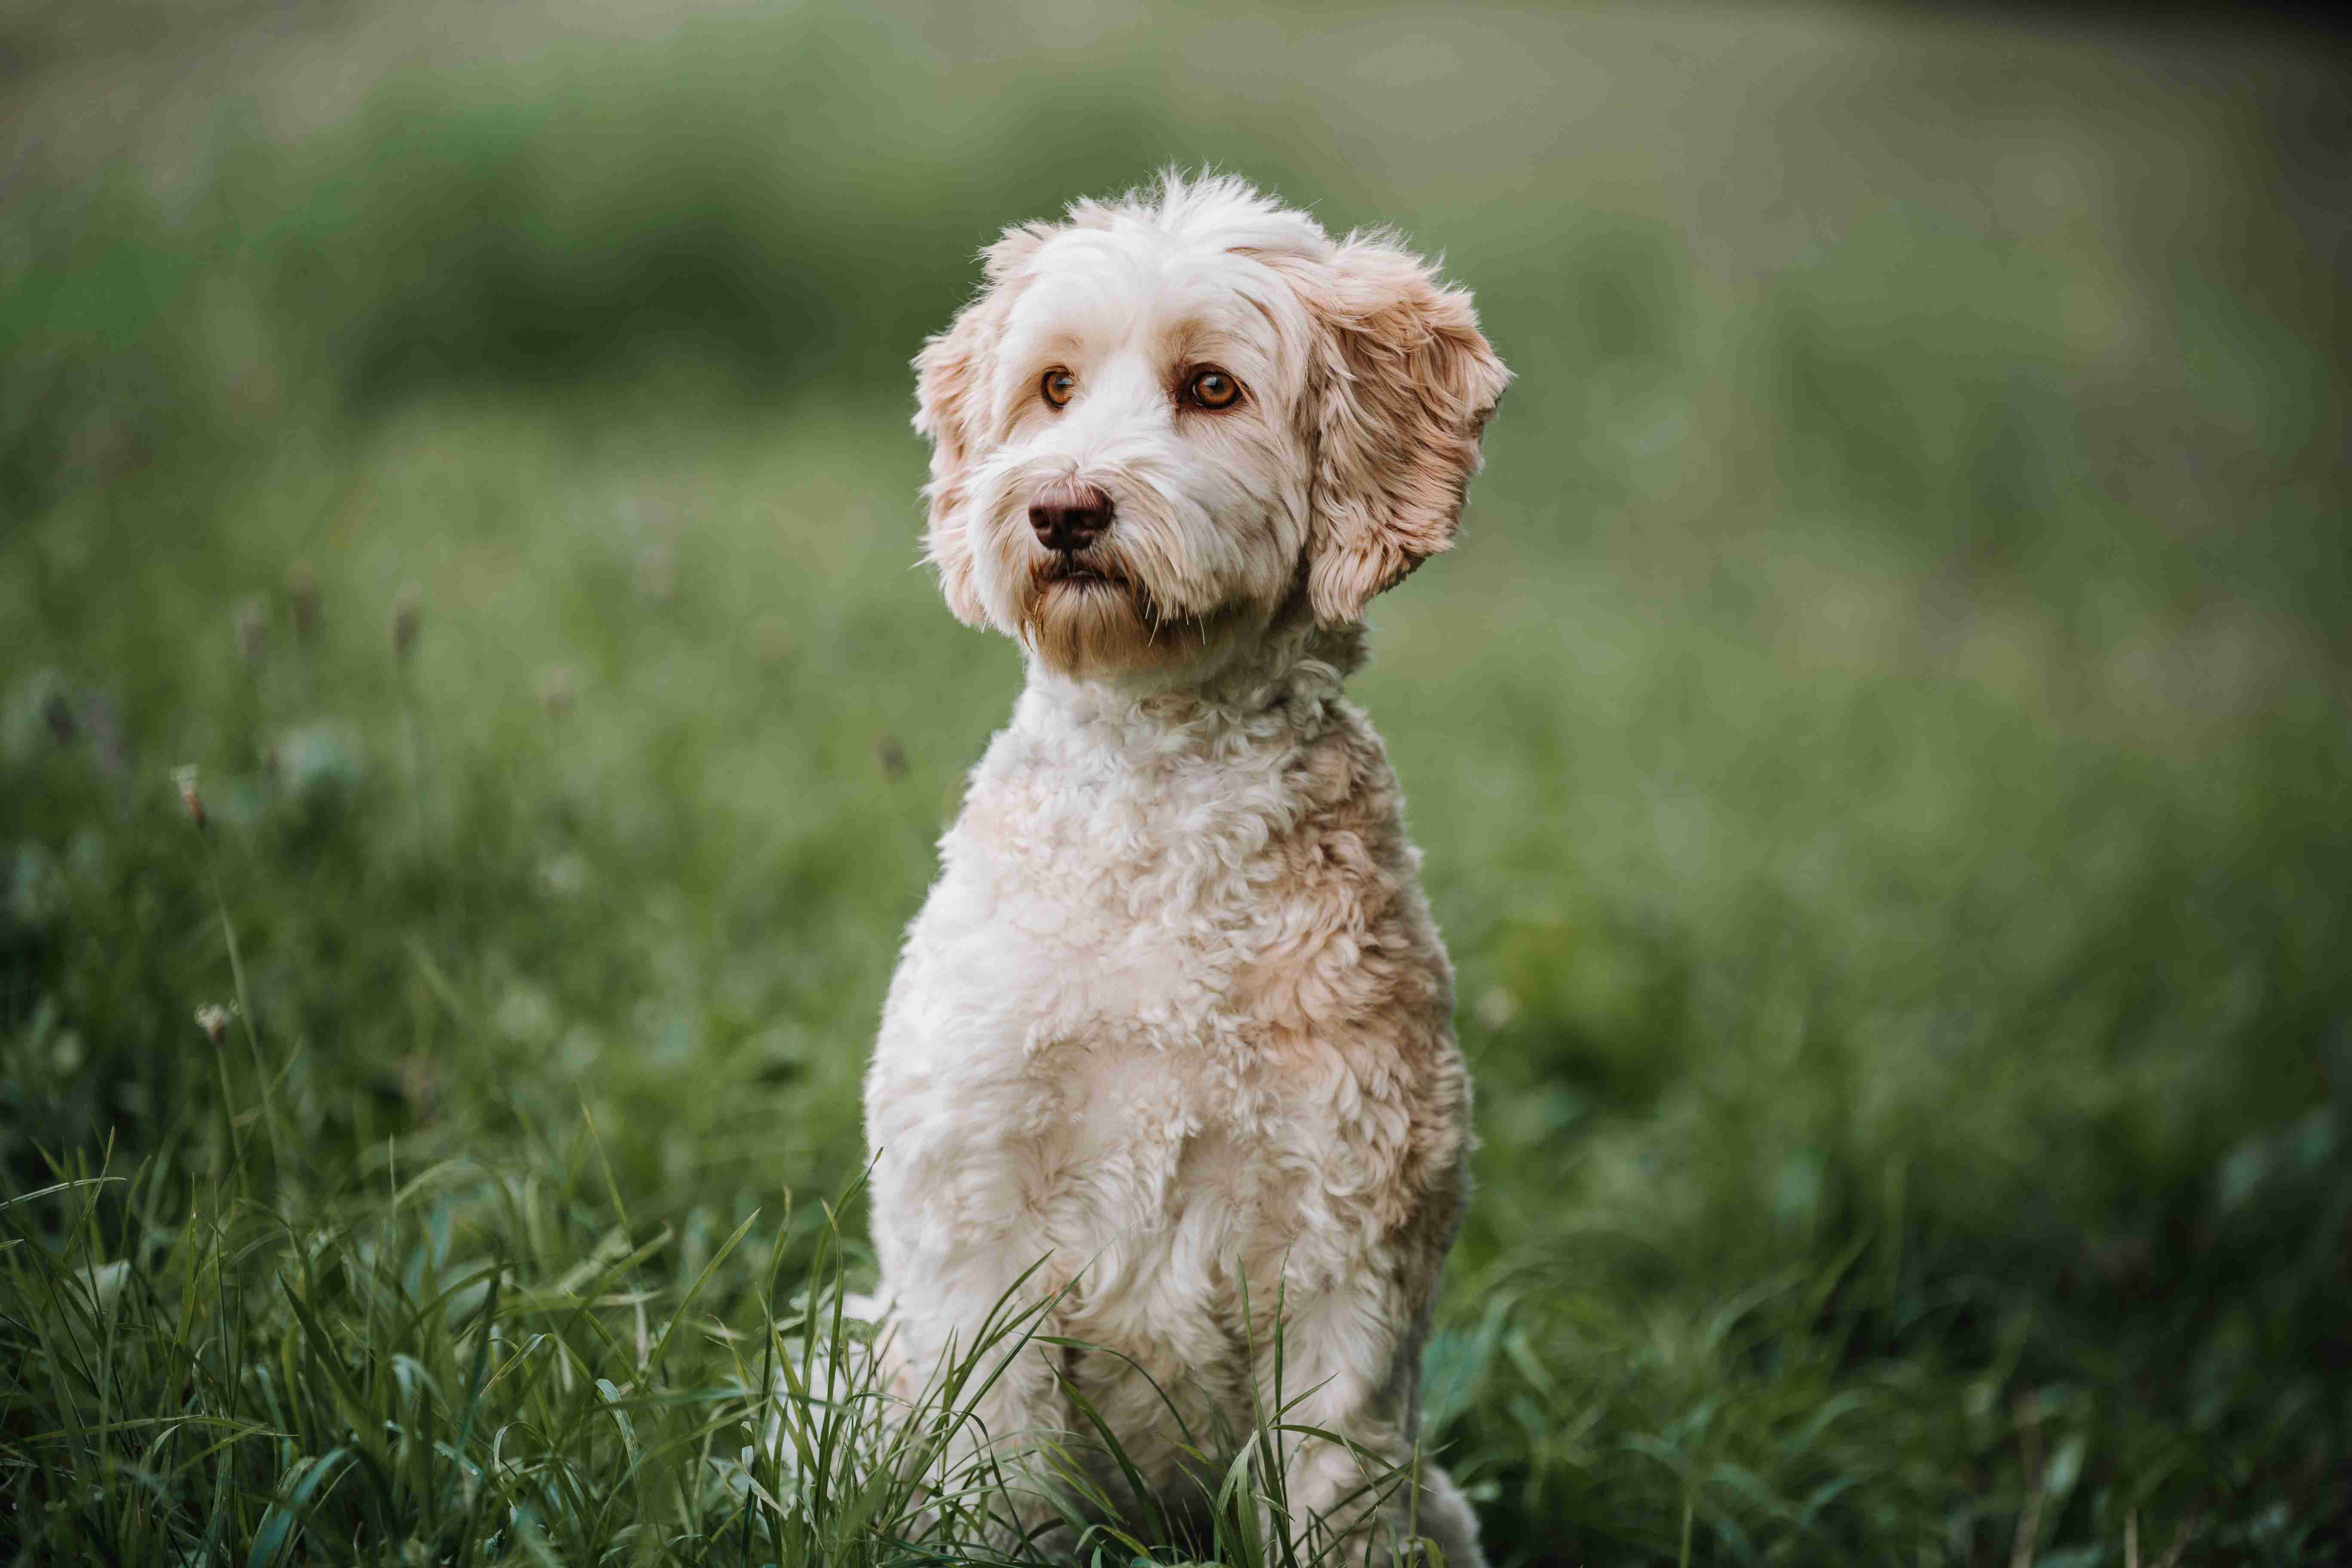 How can you help your Poodle puppy feel comfortable and secure when left alone?